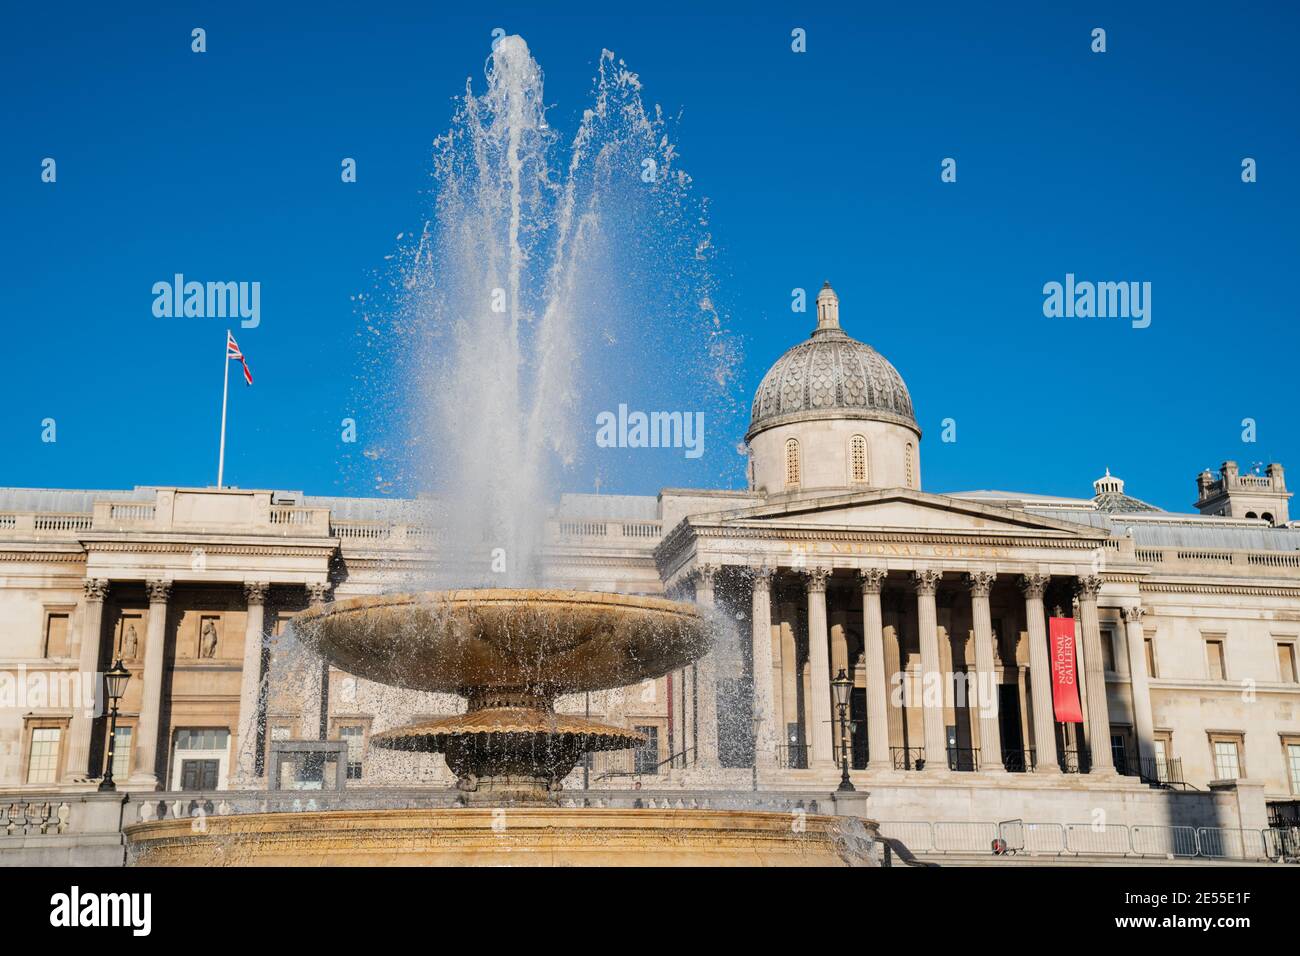 Fountain outside the National Gallery at Trafalgar Square, London, UK Stock Photo